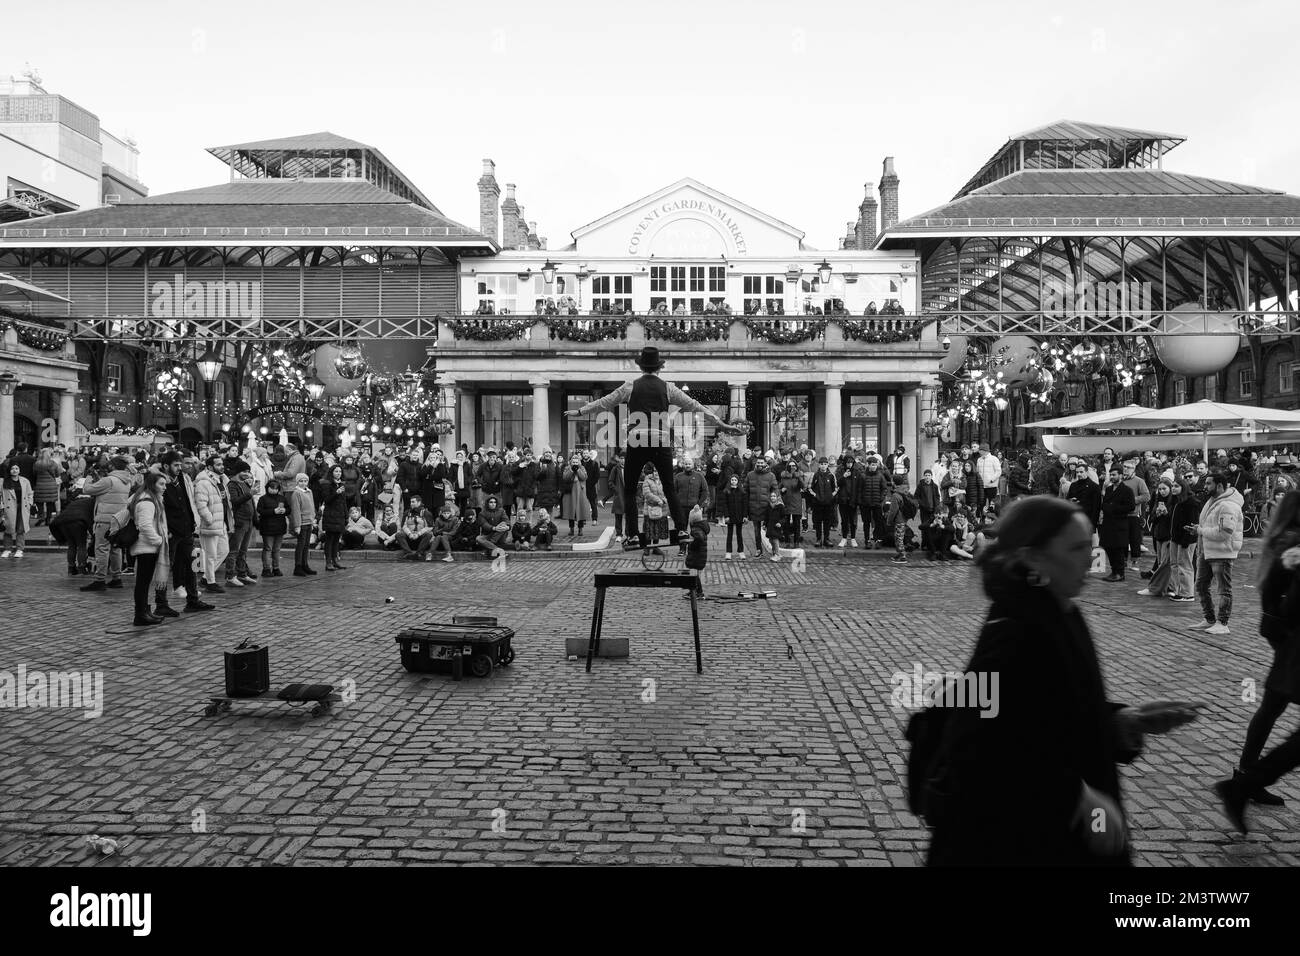 A street performer entertaining the public at Covent Garden, London, United Kingdom. Black and white photo. Stock Photo